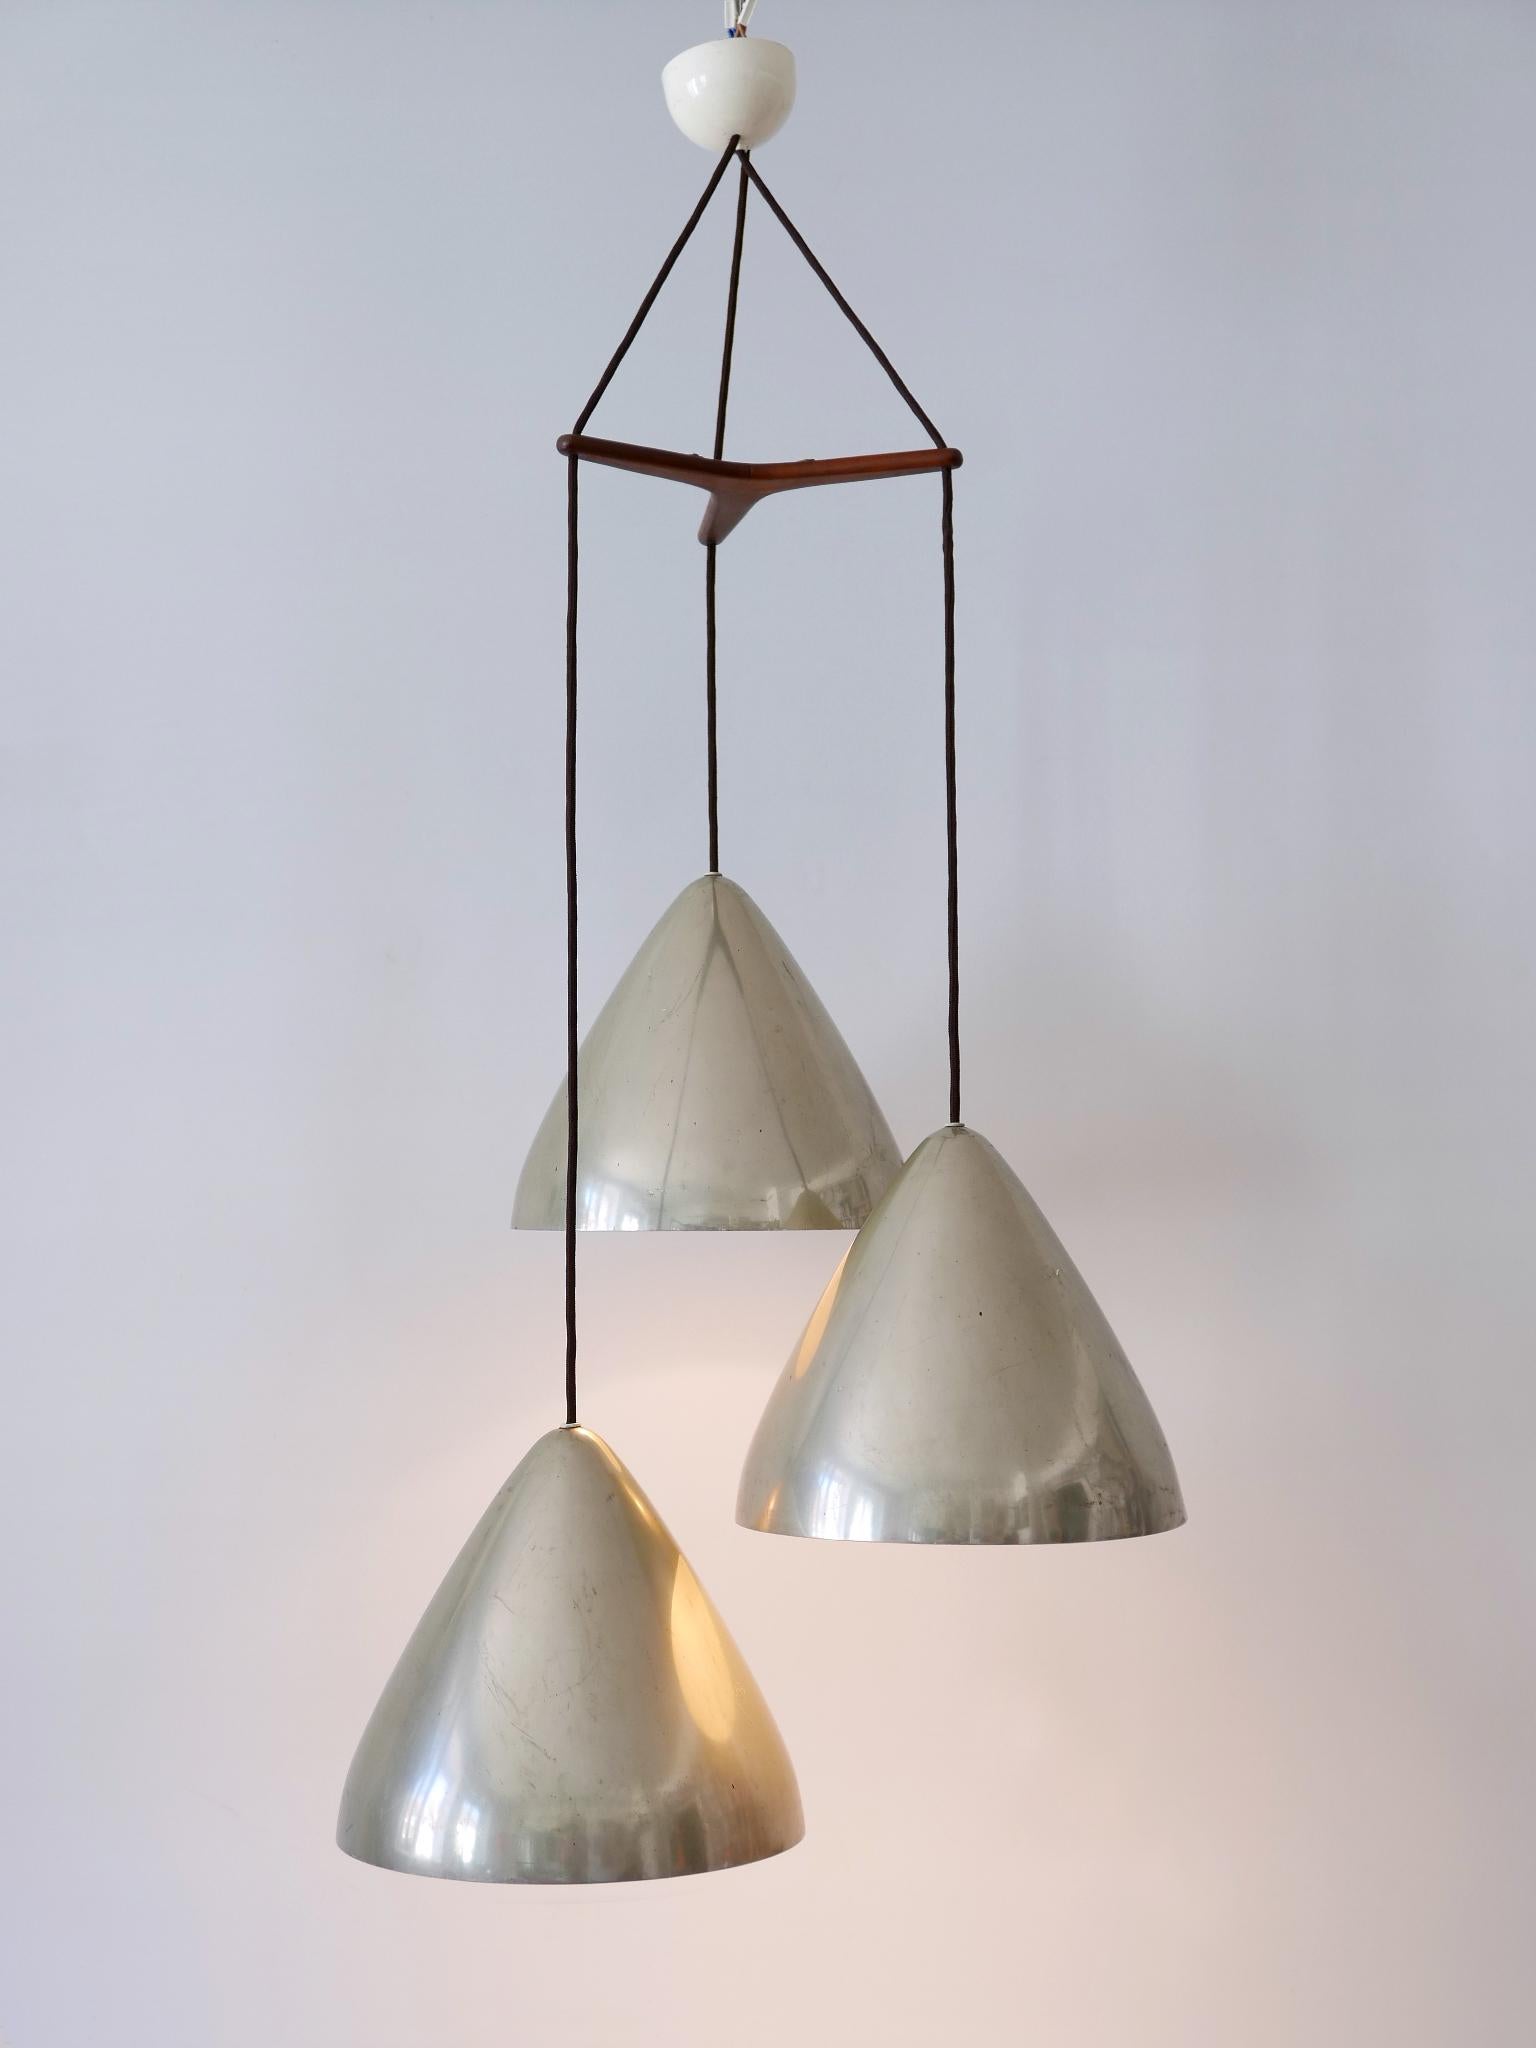 Lovely and Elegant Mid-Century Modern three-flamed cascading pendant lamp or chandelier. Designed by Lisa Johansson-Pape for Orno, Finland, 1960s. Signed to each bulb socket: ORNO

Executed in aluminium, the pendant lamp / chandelier has 3 x E27 /